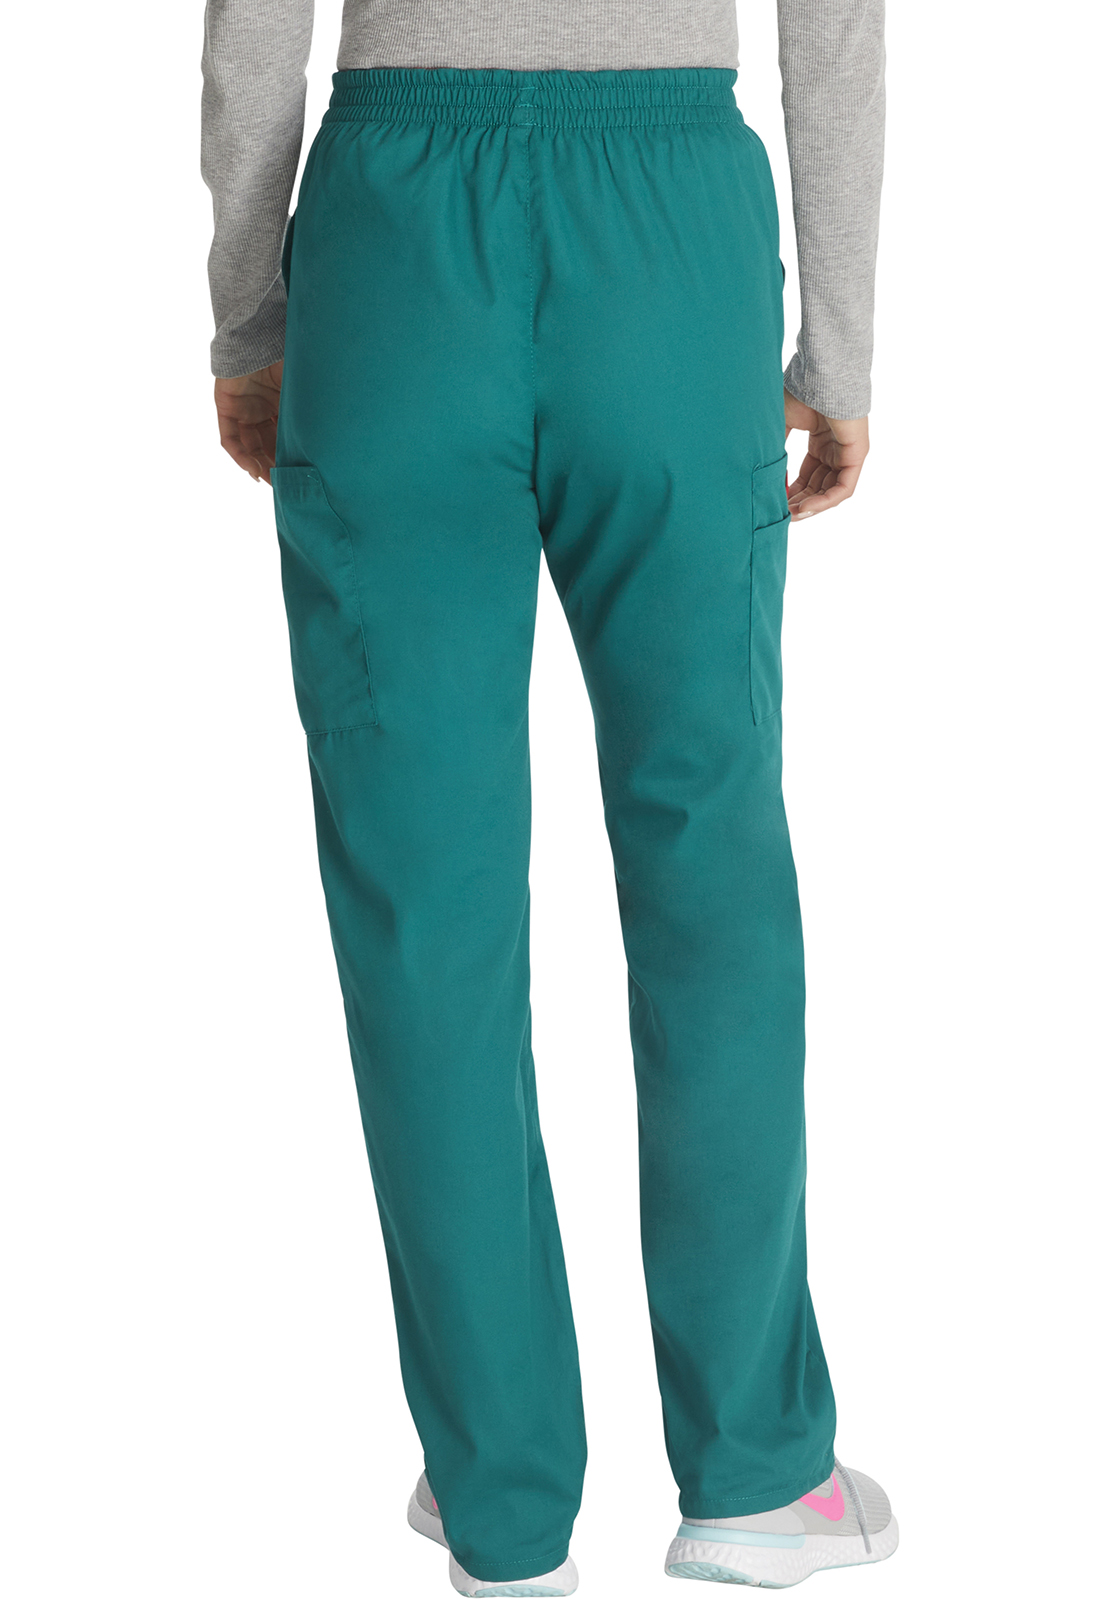 Dickies EDS Signature Scrubs Pant for Women Natural Rise Tapered Leg Pull-On Plus Size 86106, 4XL, Hunter - image 2 of 7